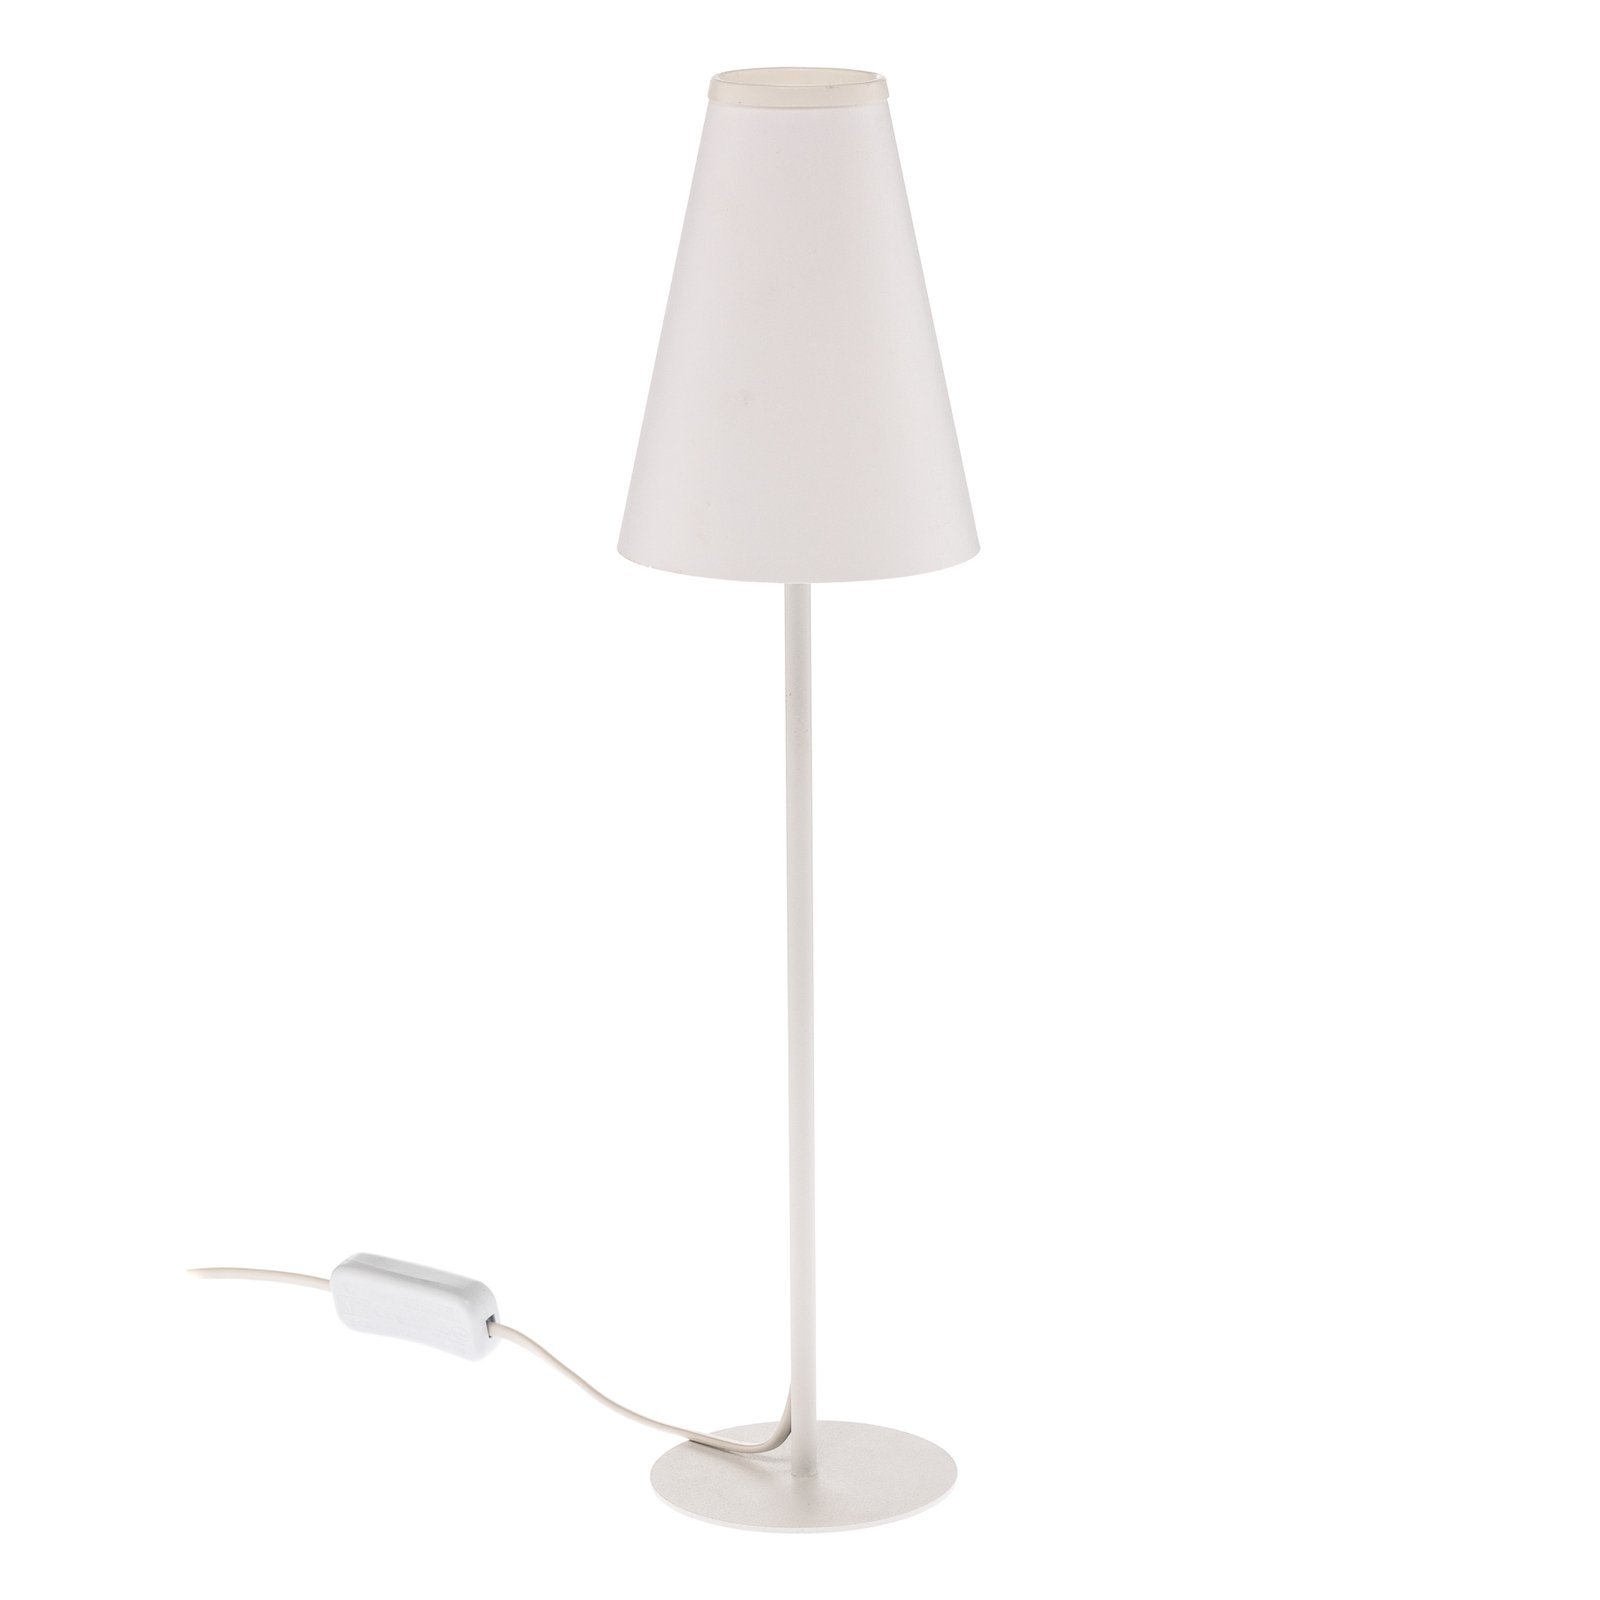 Trifle table lamp, white